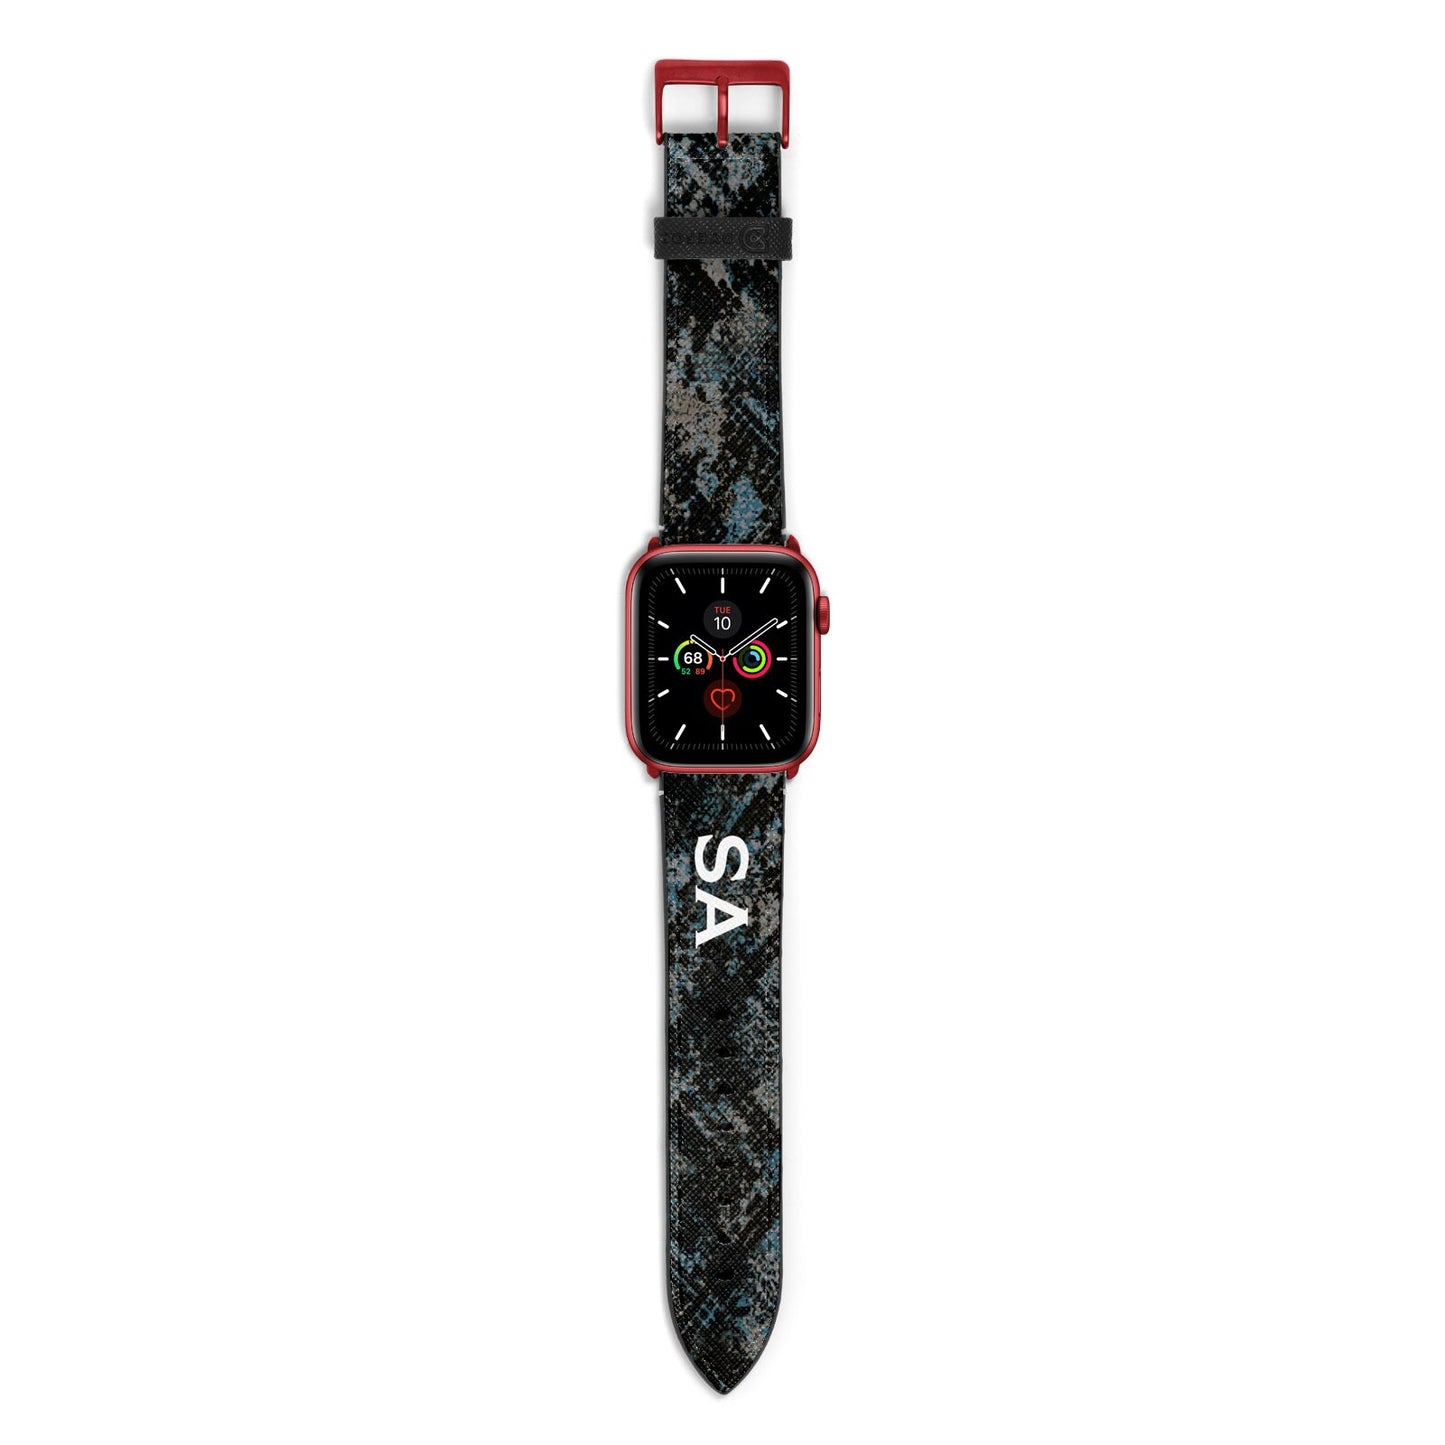 Personalised Snakeskin Effect Apple Watch Strap with Red Hardware